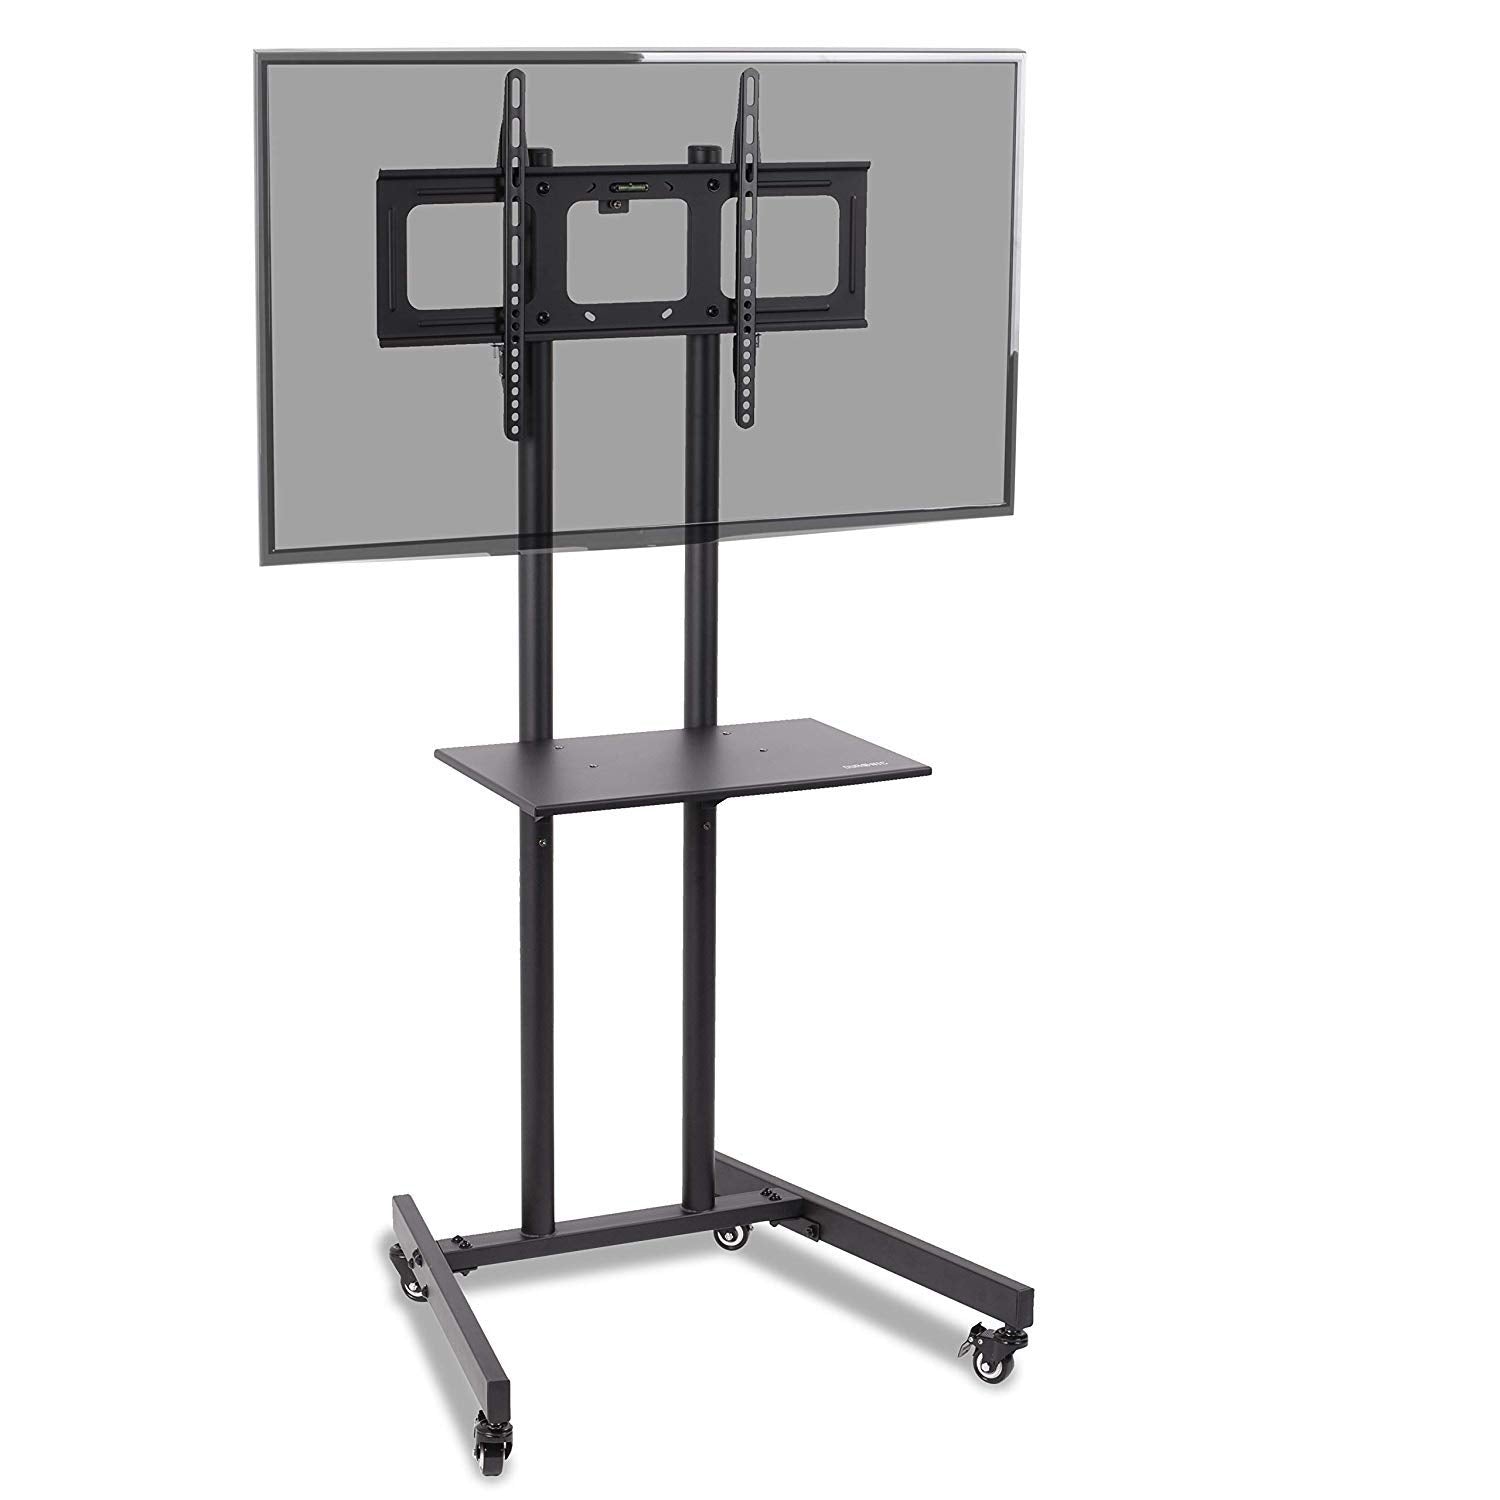 Duronic Mobile TV Stand on Wheels TVS5T1, Trolley Mount with Shelf Heavy duty for 32-70 Inch Flat Screen Television LCD LED OLED QLED, VESA Up to 600x400, Max. 68kg / 150lbs Capacity